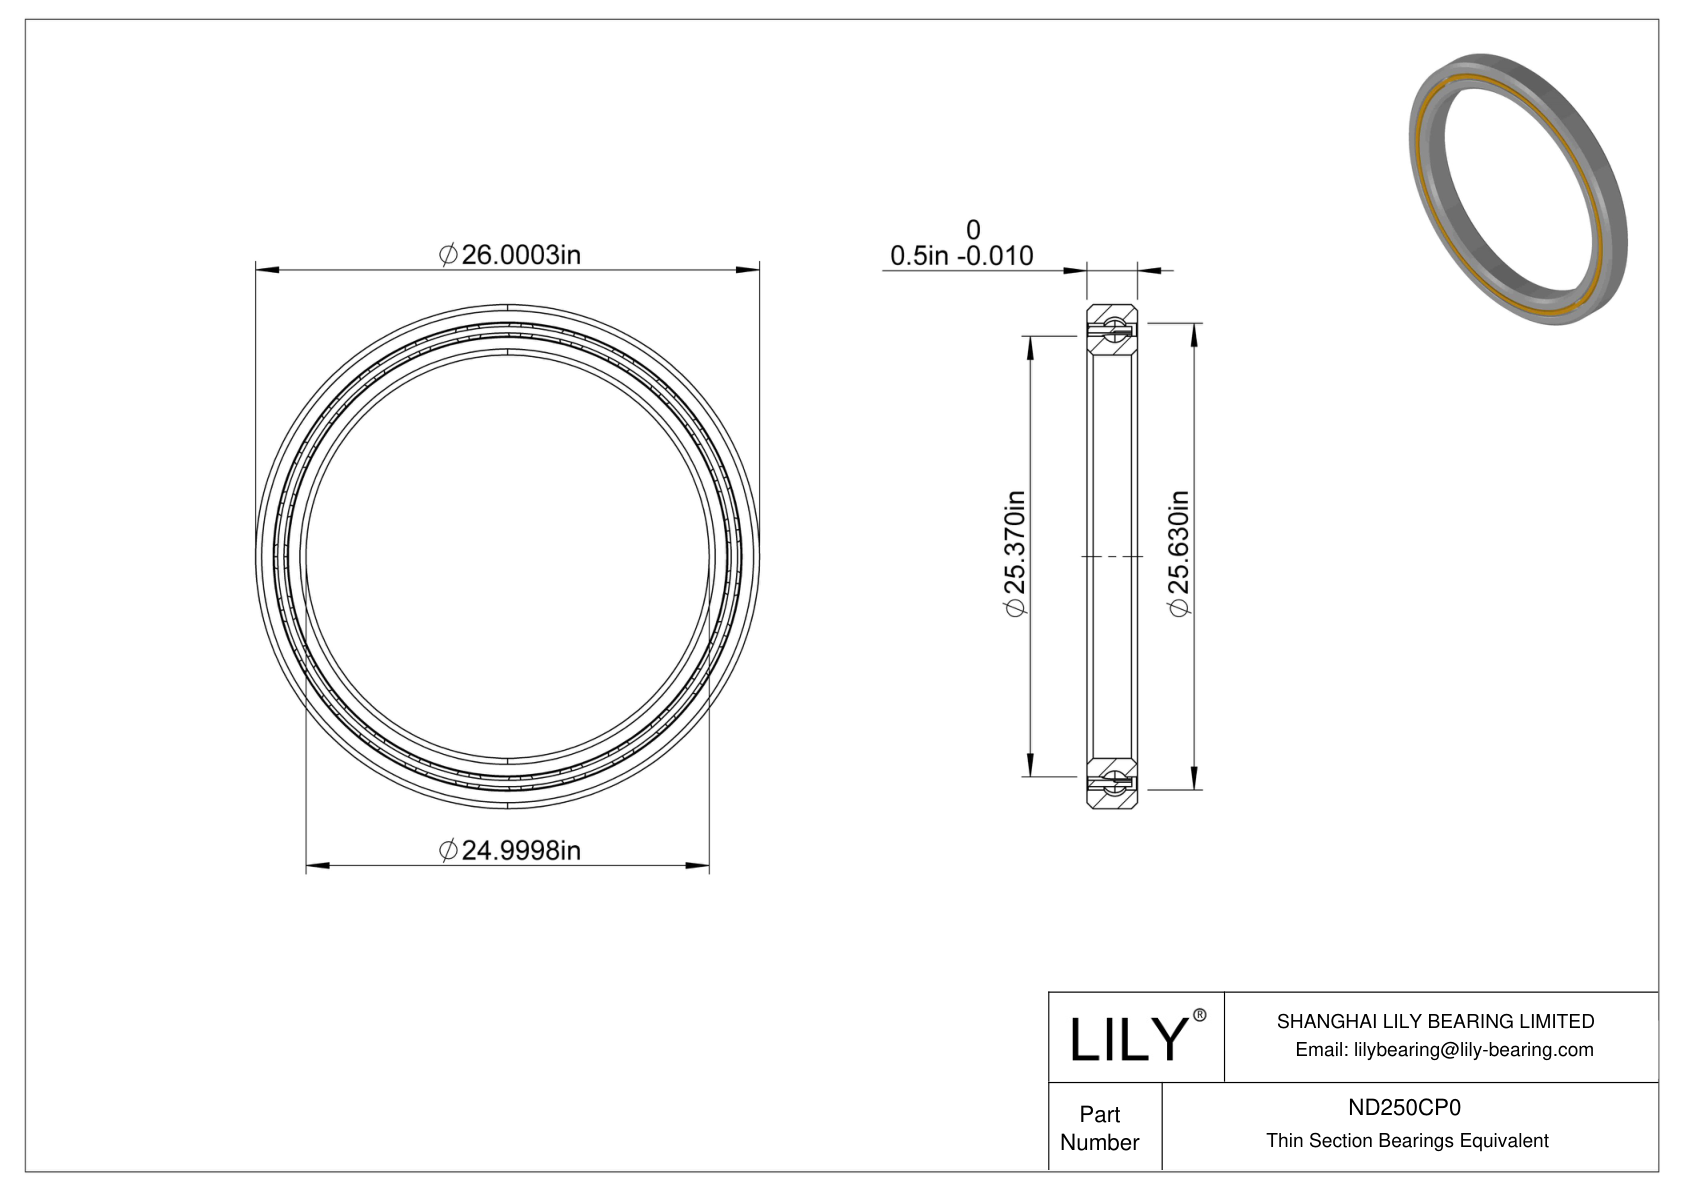 ND250CP0 Constant Section (CS) Bearings cad drawing